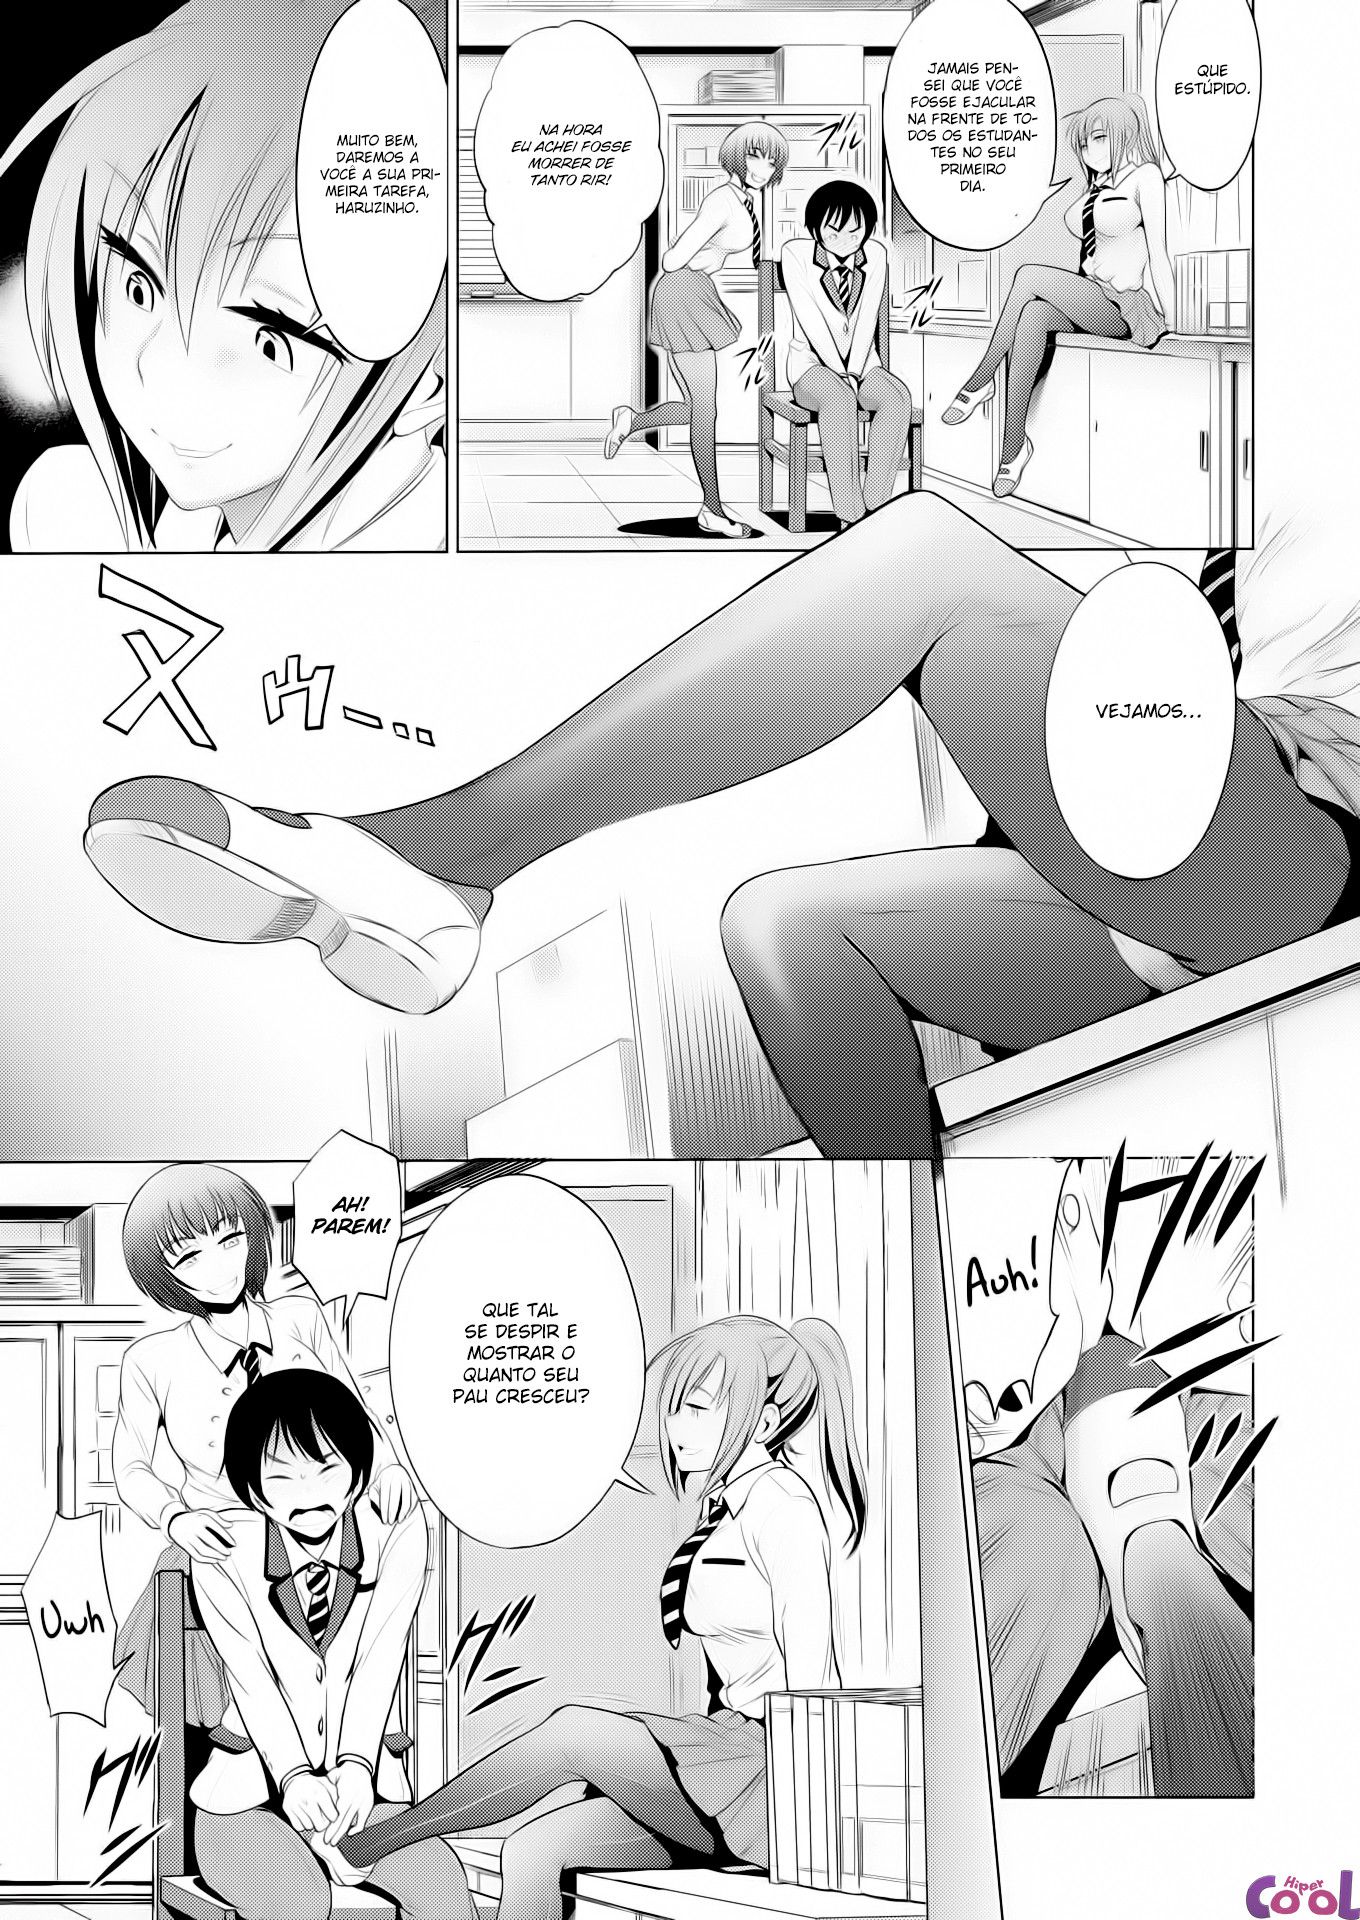 devil-sisters-chapter-01-page-08.jpg